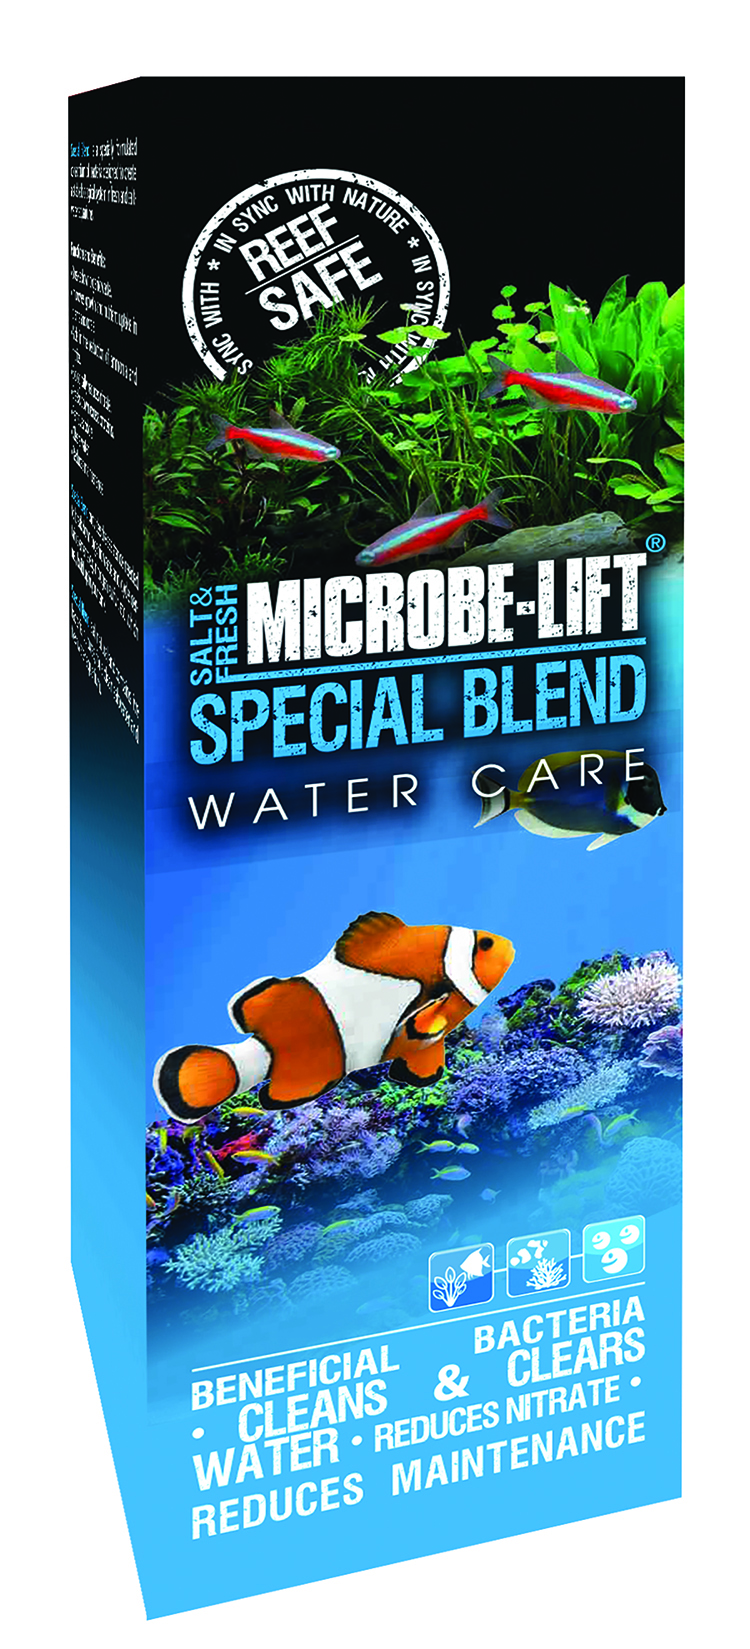 Microbe-Lift Special Blend for Home Aquariums